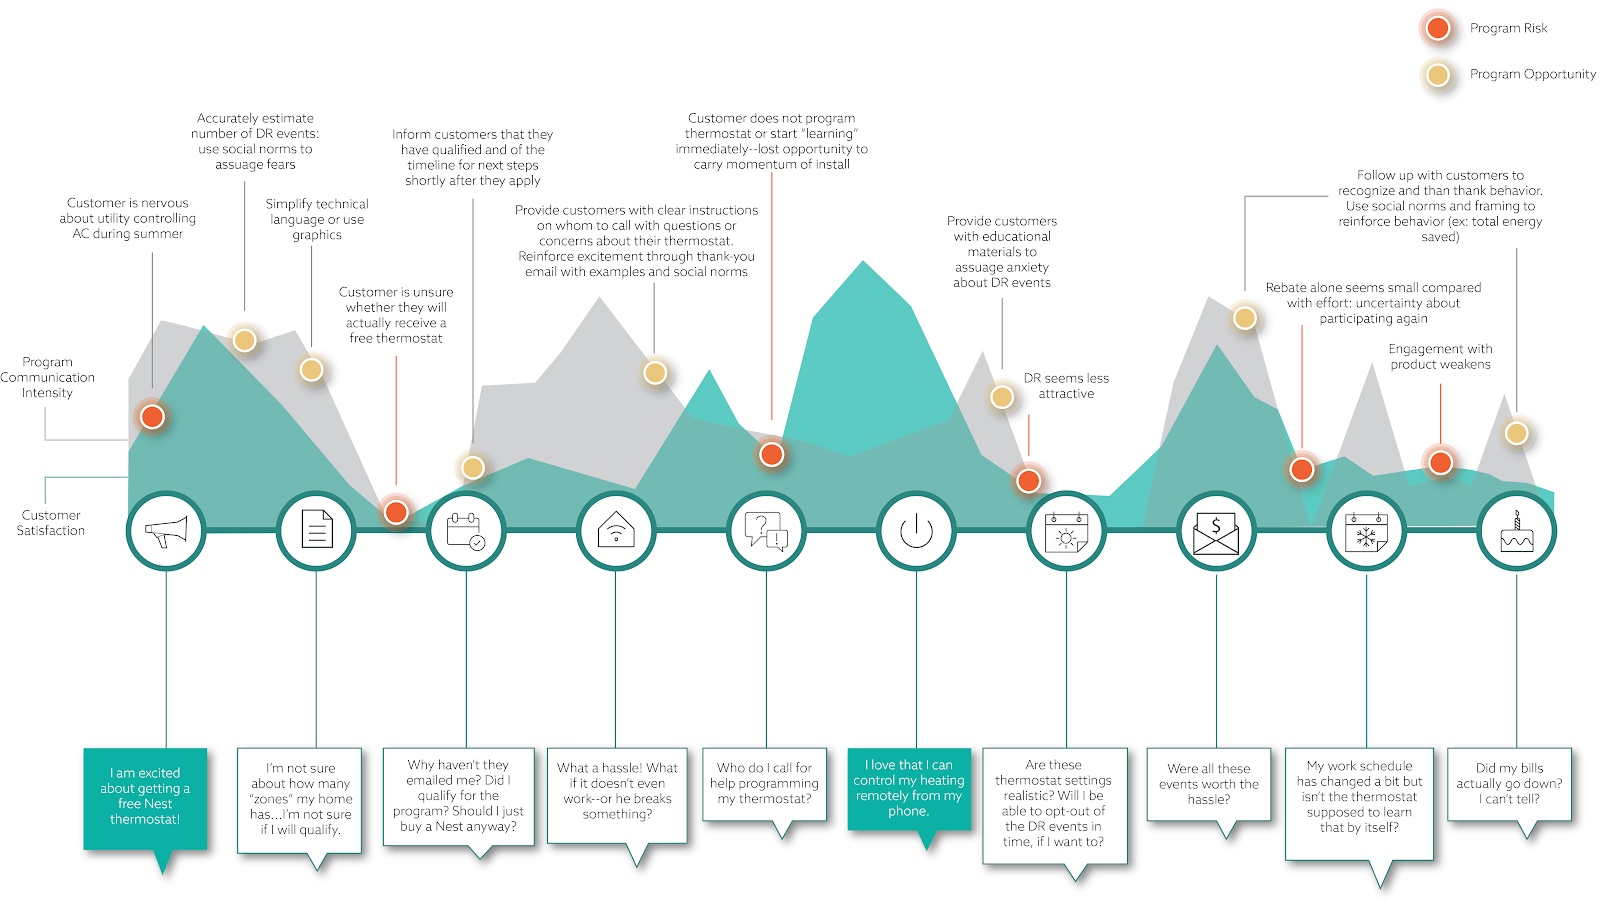 journey map is a visualisation of the experience